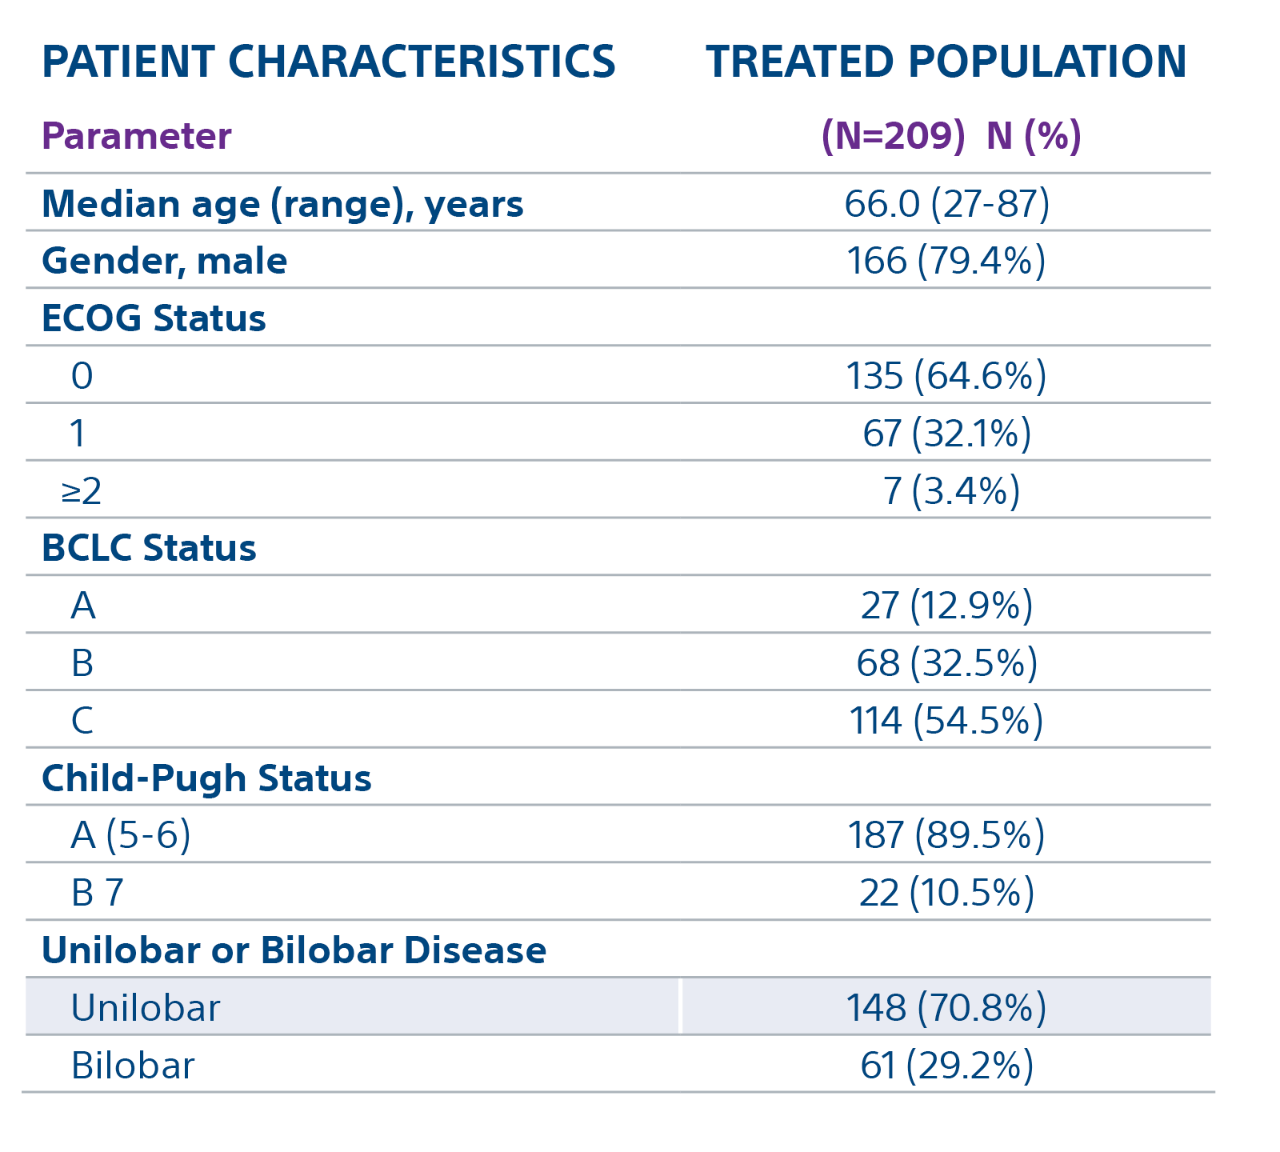 Table on patient characteristics, parameter, and treated population (N-209) N (%); parameters are Median age (range), years, Gender, male, ECOG Status, BCLC Status, Child-Pugh Status, Unilobar or Bilobar Disease.